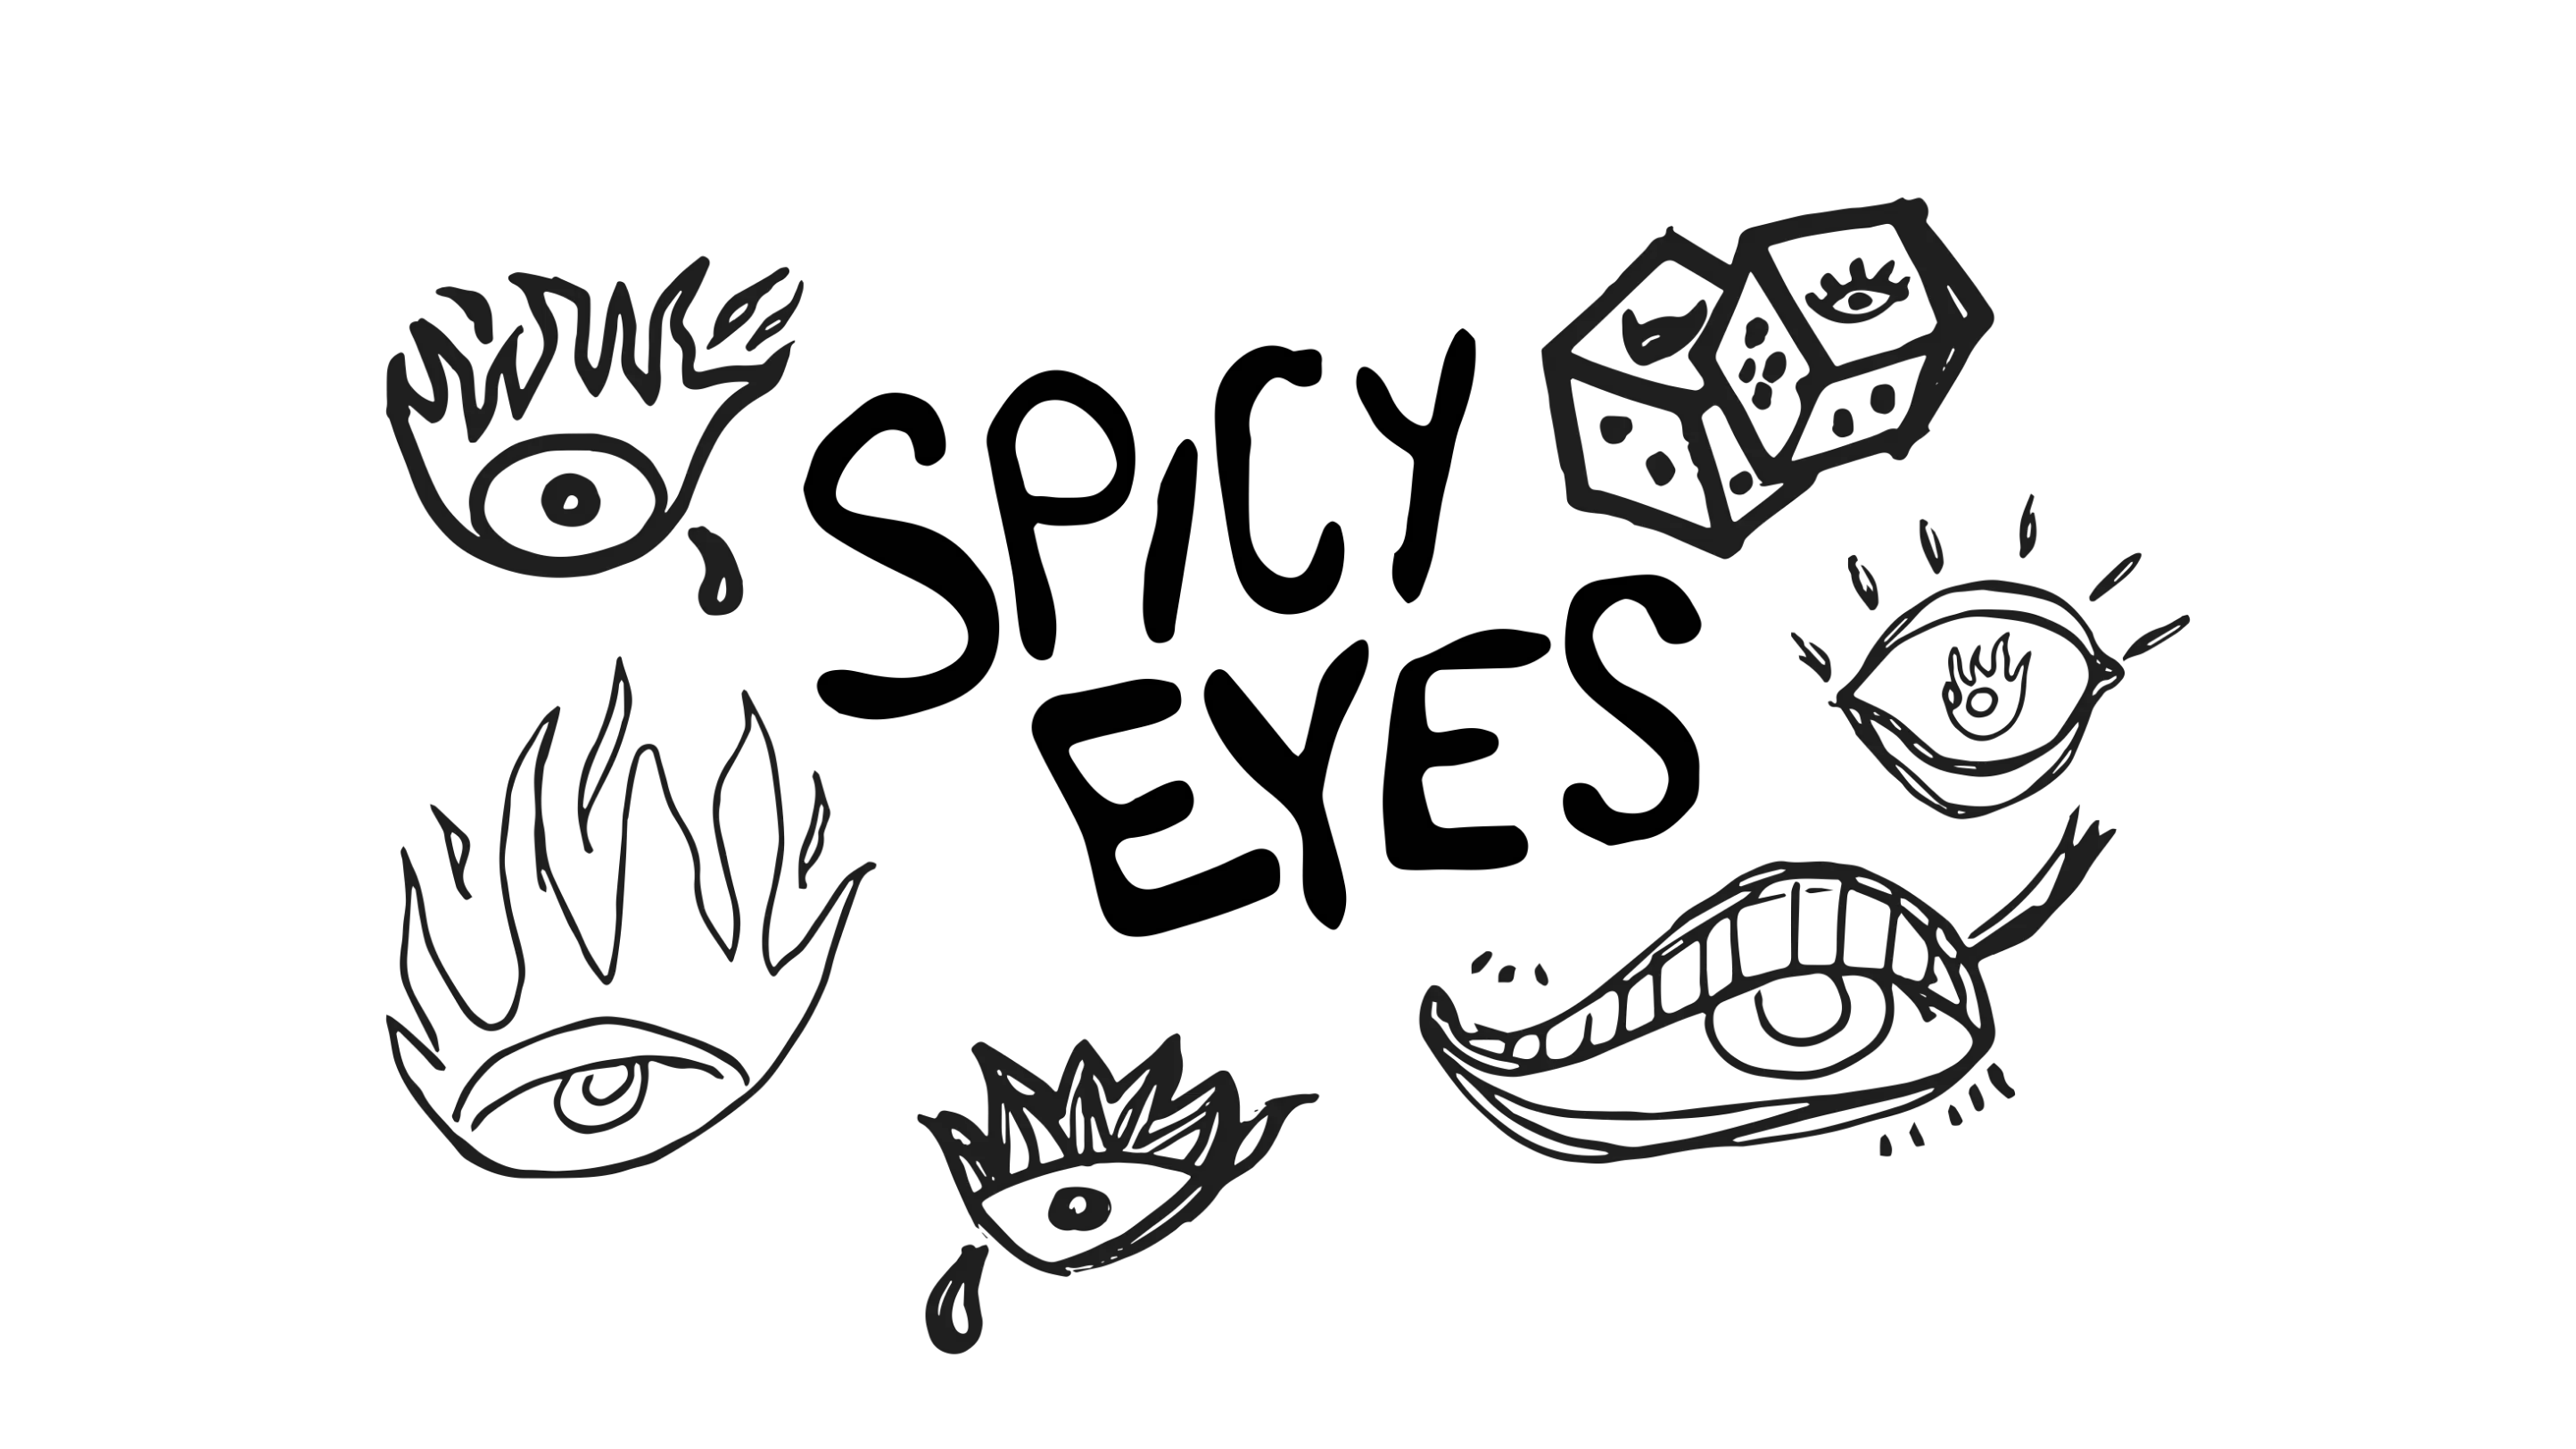 Spicy Eyes logo and icon sketch group.